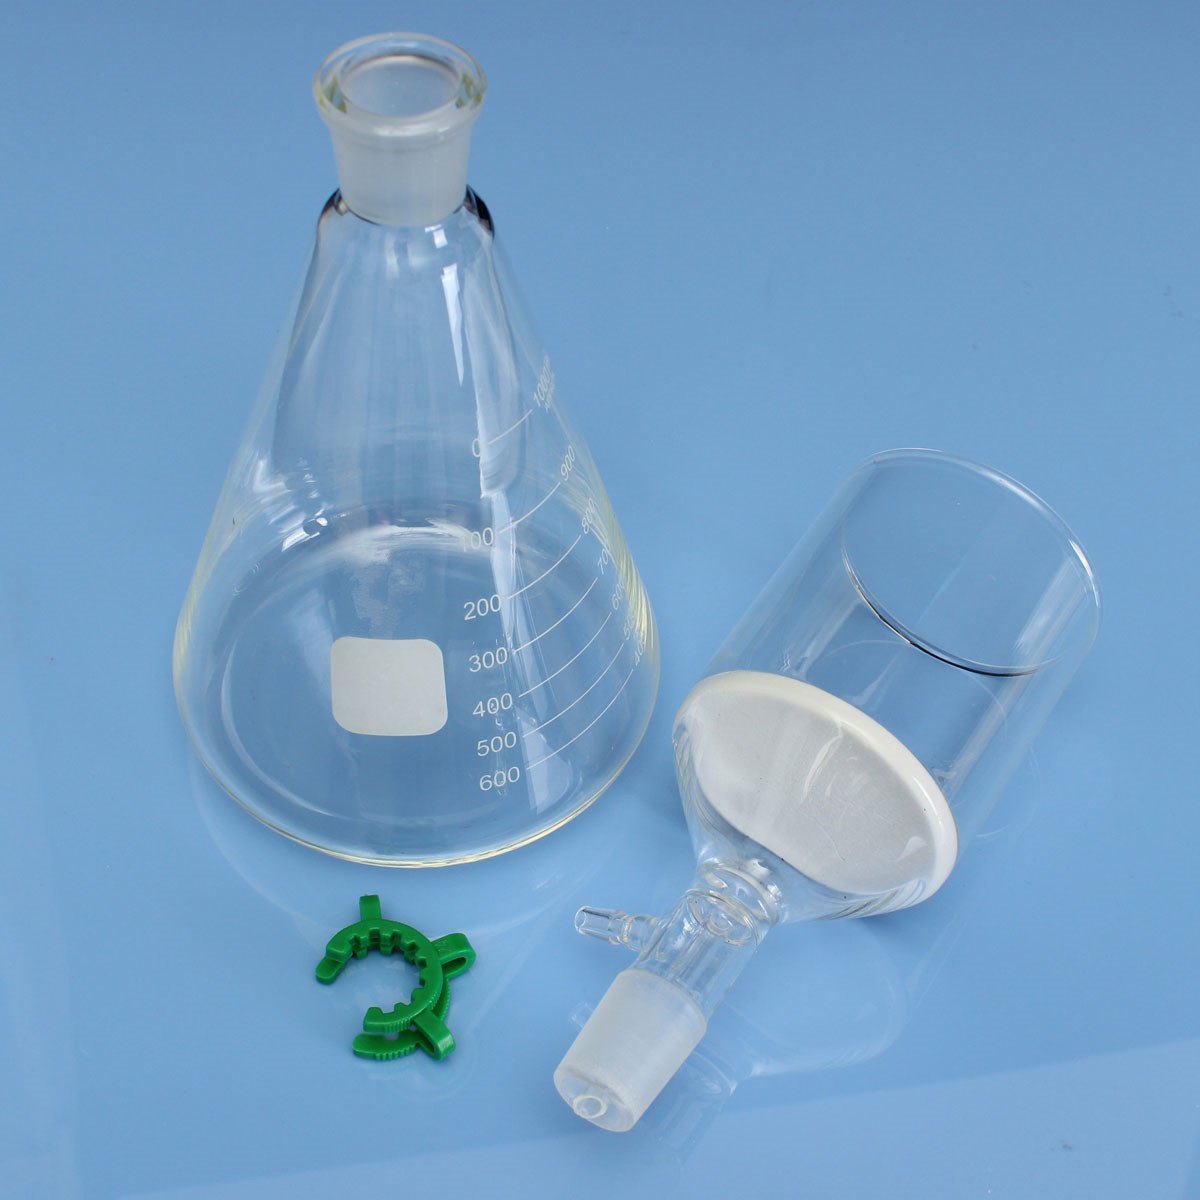 Glass-Vaccum-Suction-Filter-Filtration-Kit-250ml-Buchner-Funnel-1000mL-Conical-Flask-992081-7